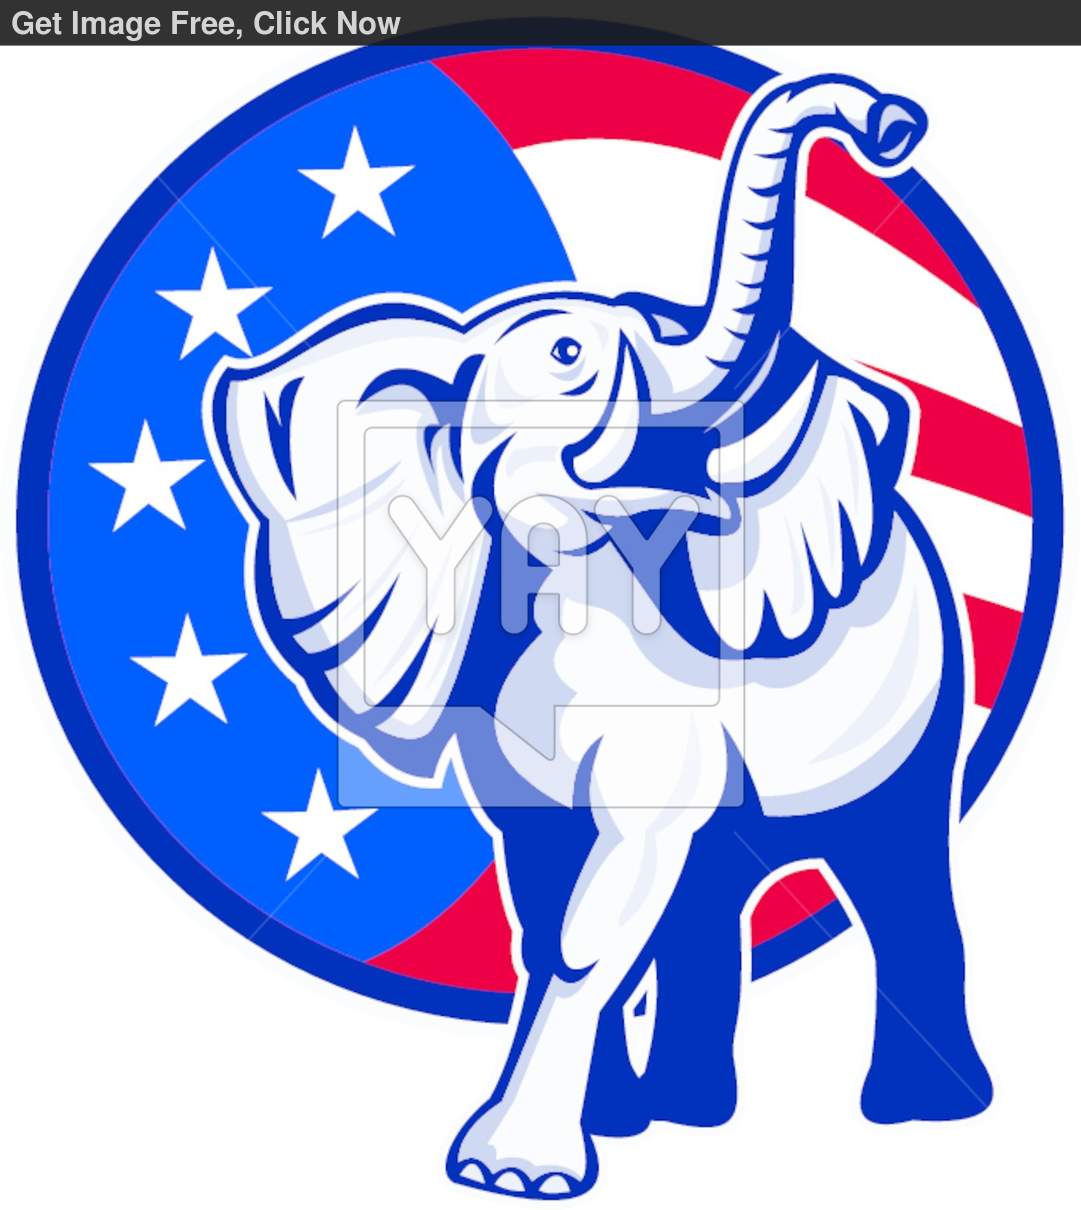 The Republican Elephant First Appeared In Political Cartoons Of